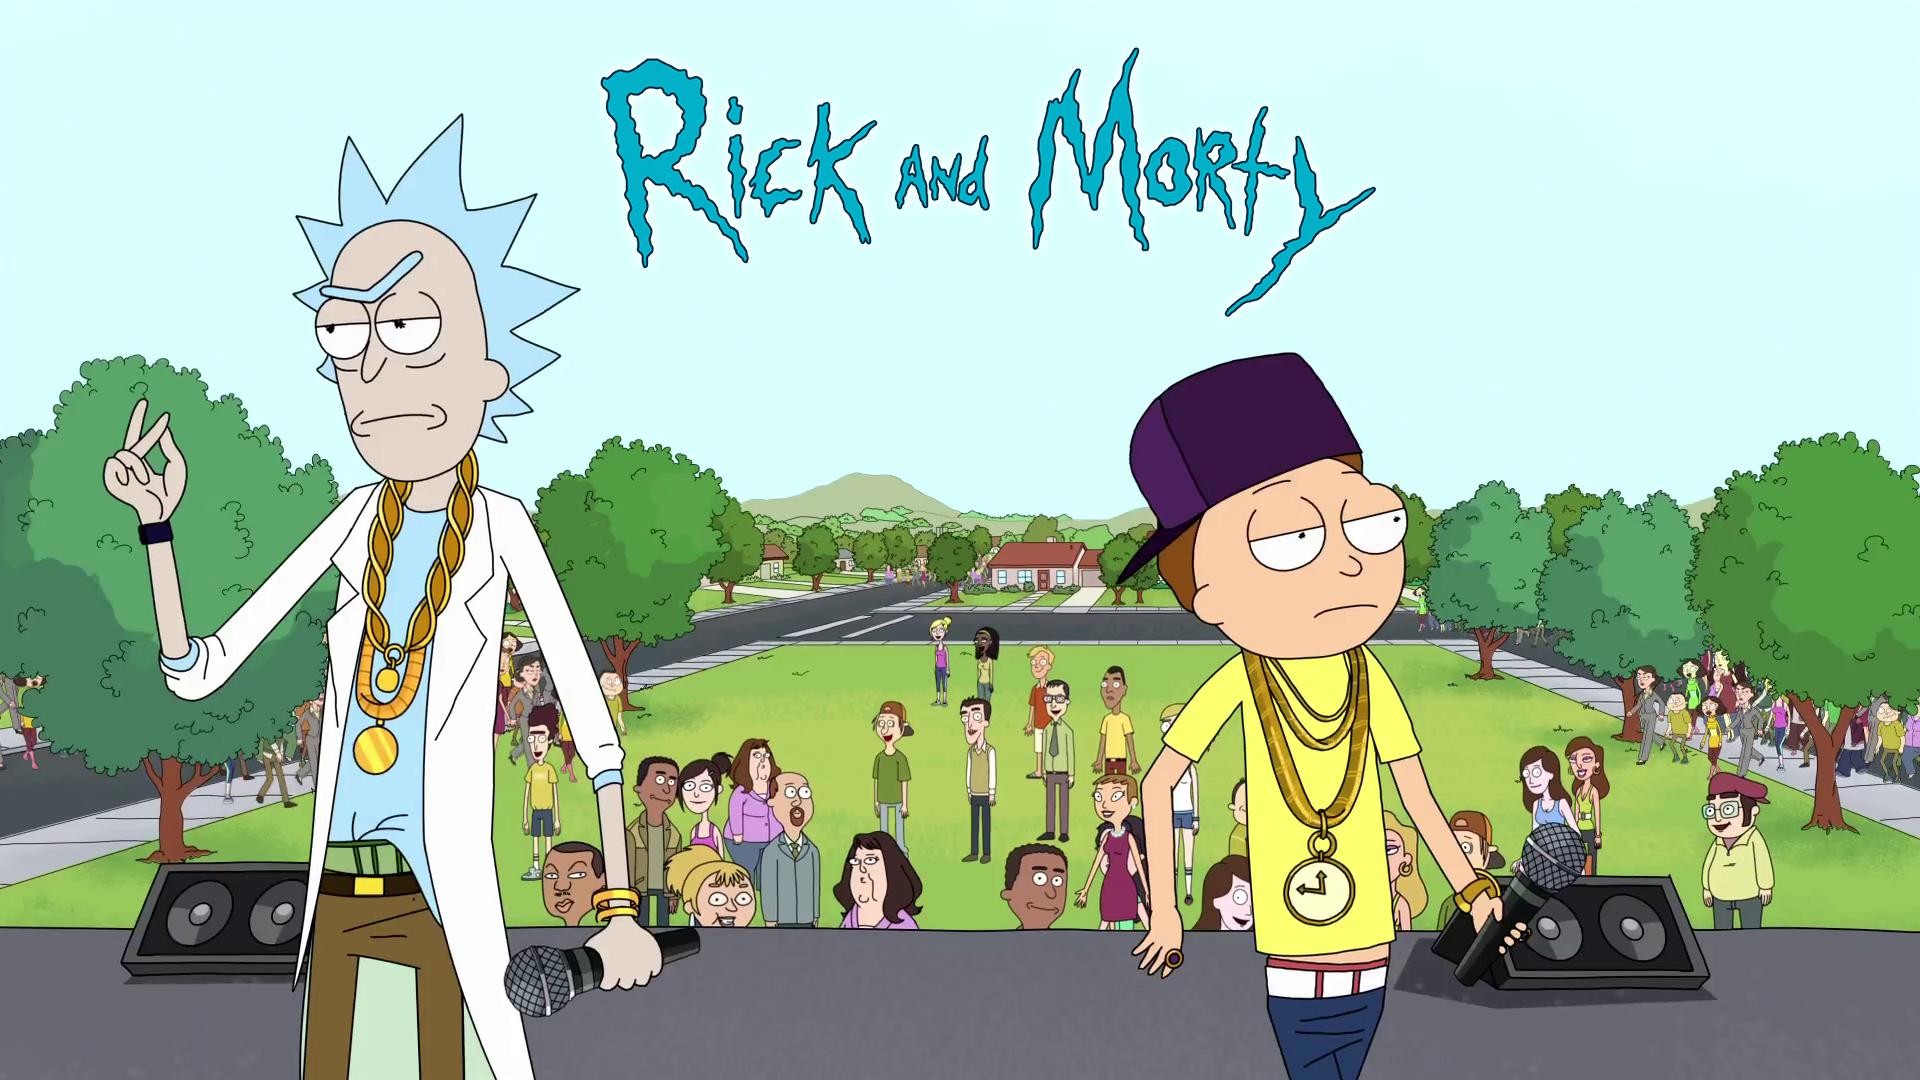 Rick and Morty wallpaper 1080p ·① Download free stunning High